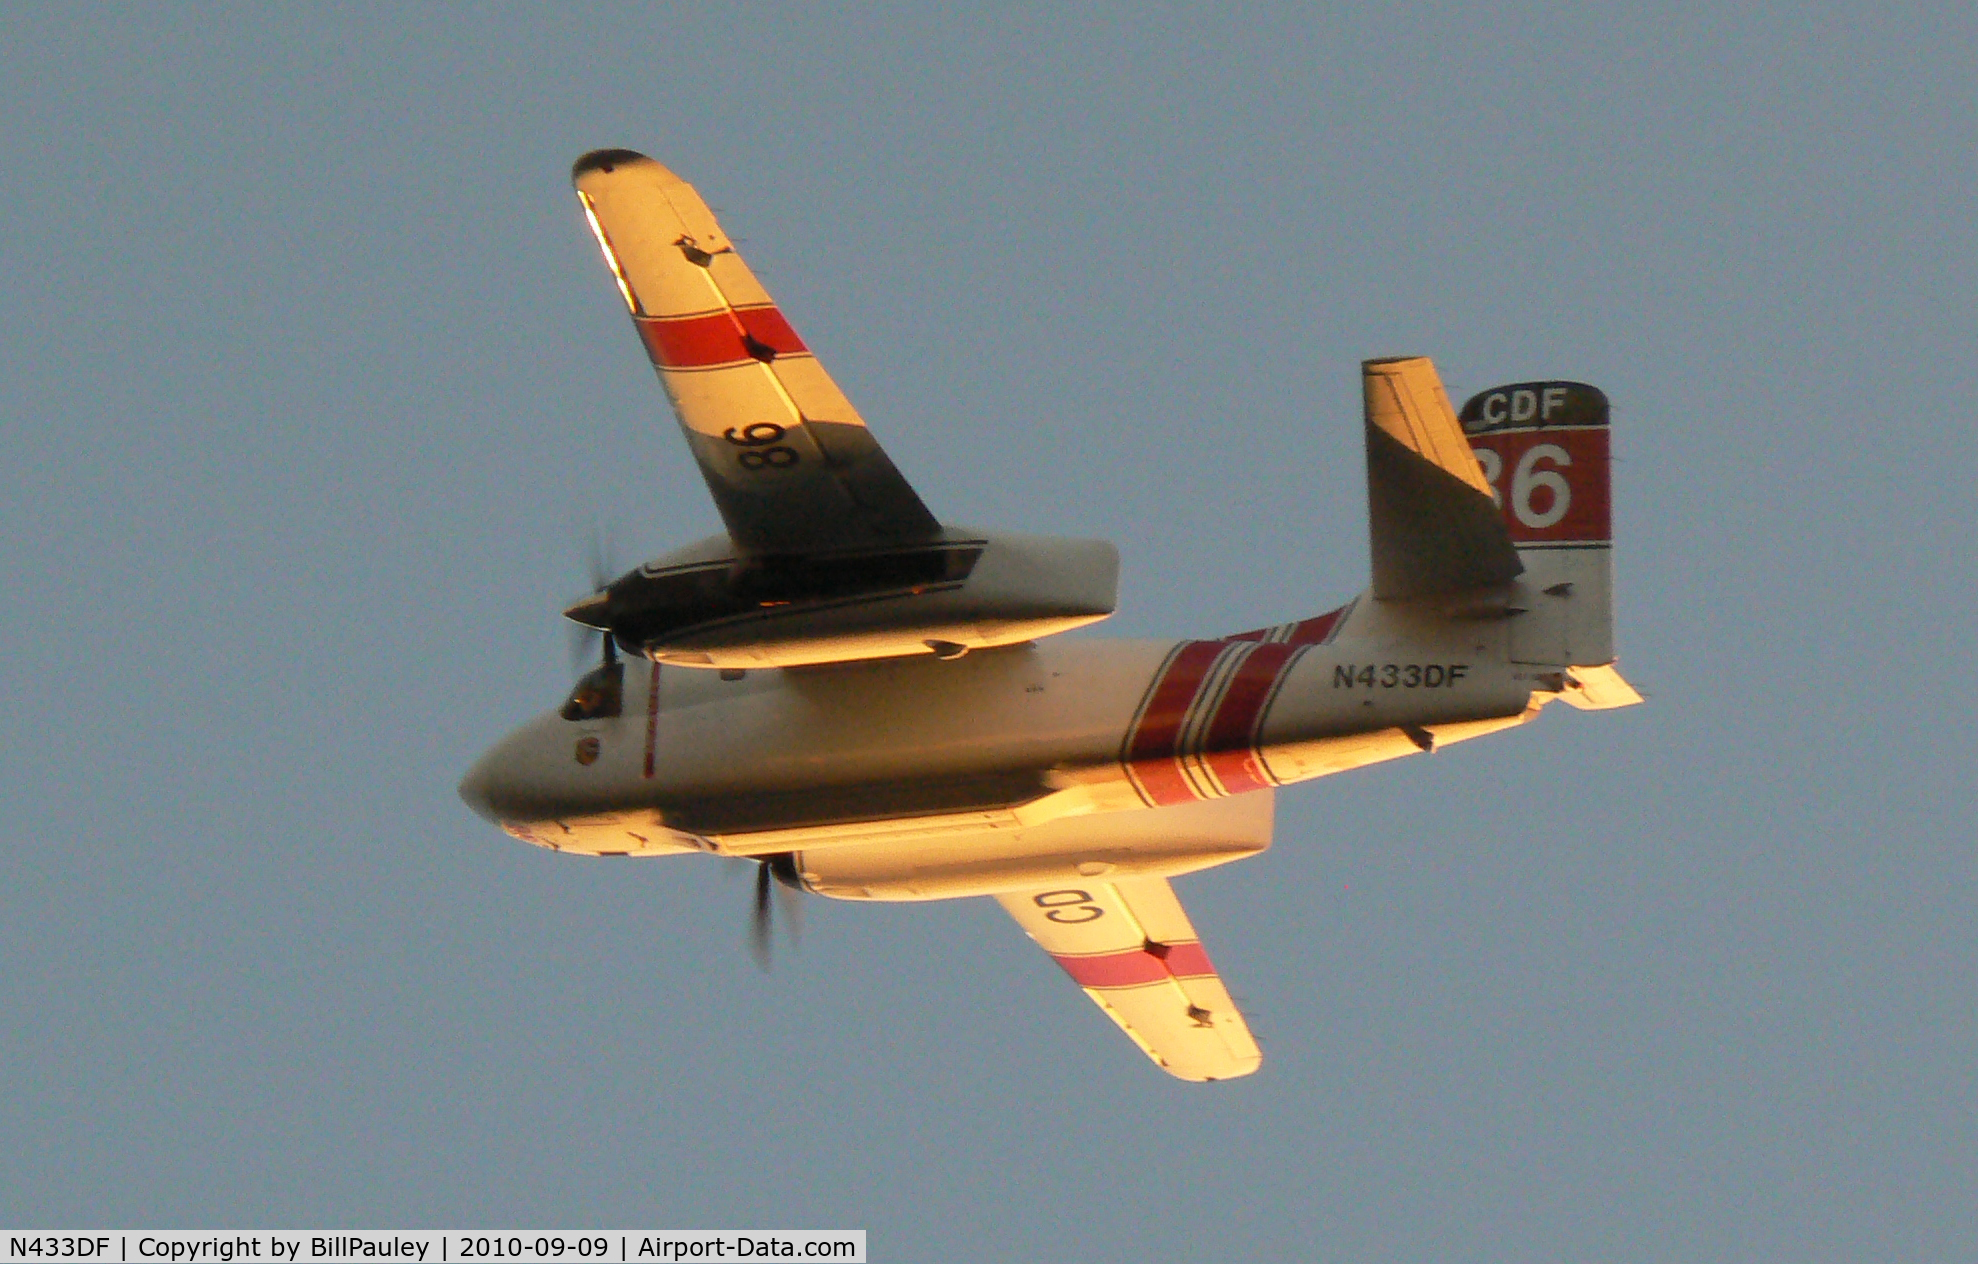 N433DF, Marsh Aviation S-2F3AT C/N 149855, One of two CALFIRE S-2F3AT tanker circling over San Bruno, CA, site of massive natural gas pipeline explosion.  CALFIRE's Bell EH-1 N495DF also on site as a Cal Fire OV-10 Bronco coordinated drops.